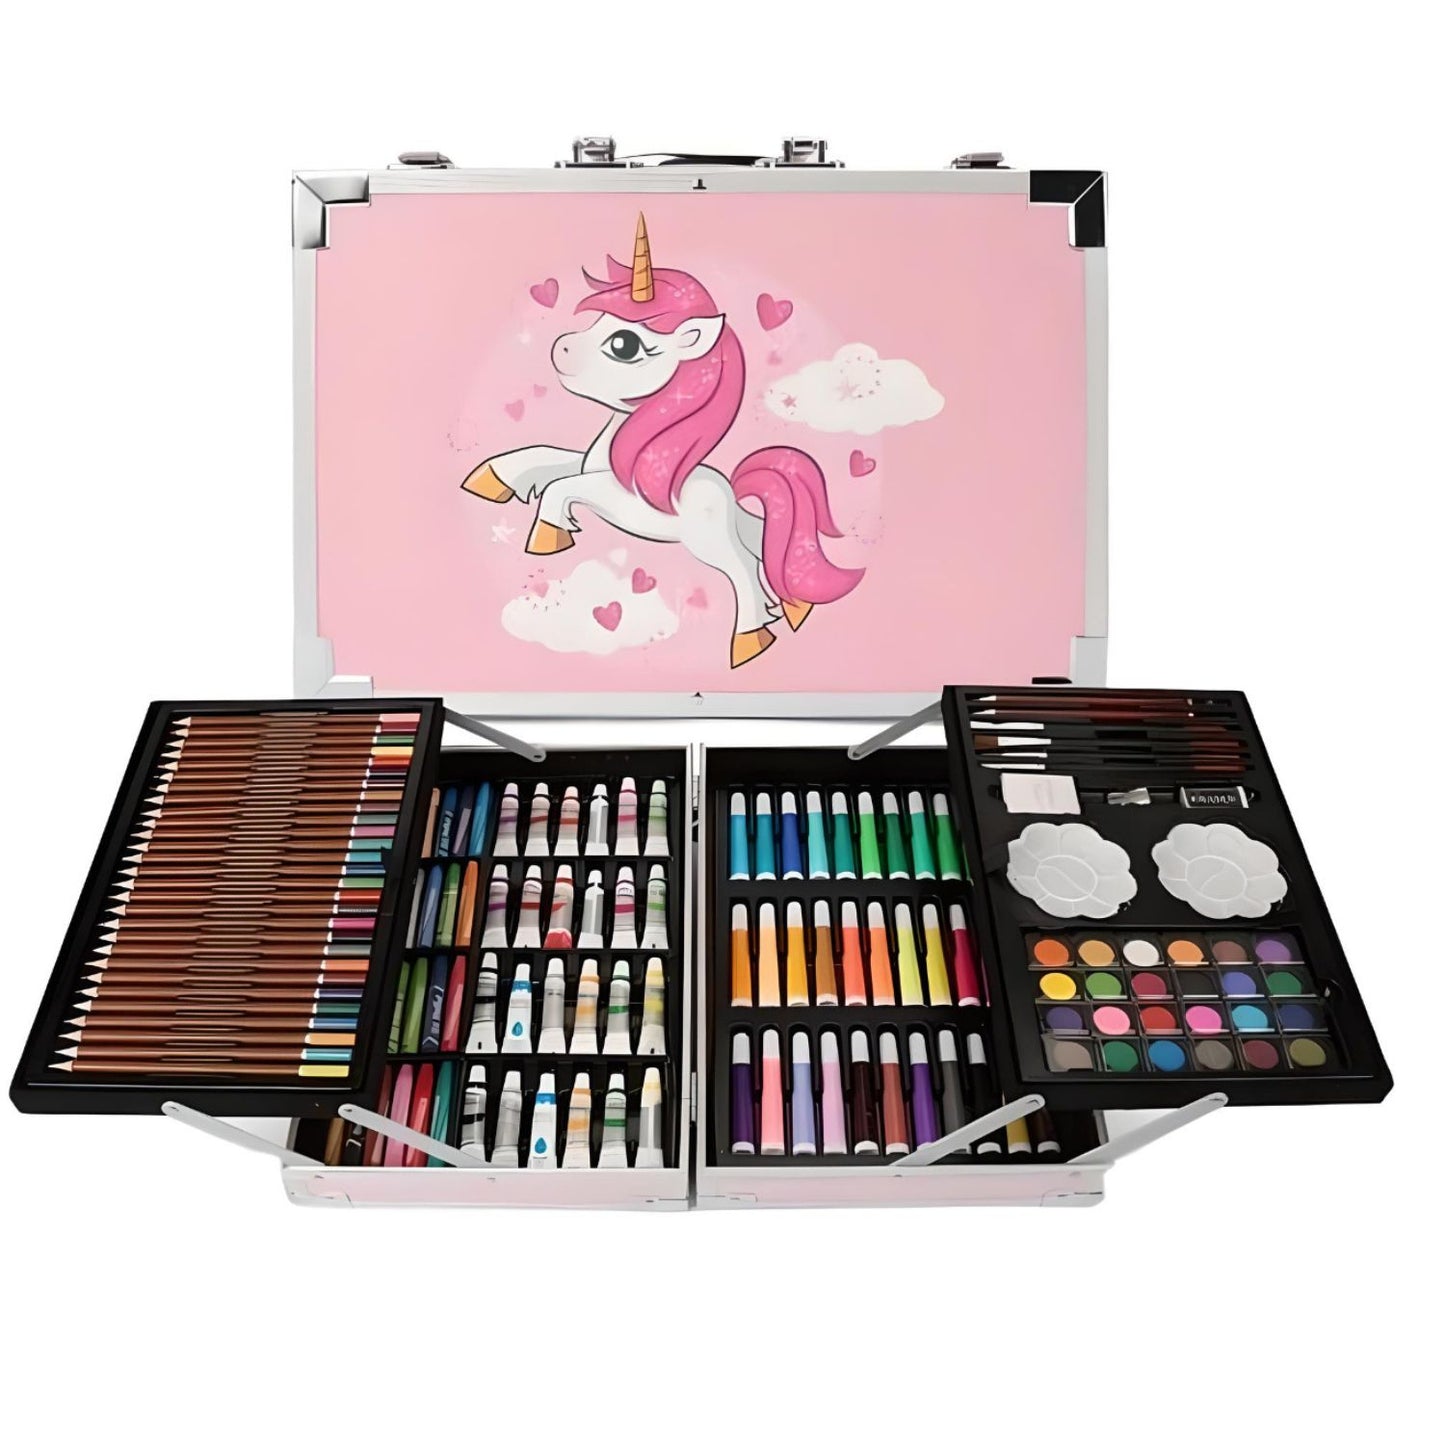 MM TOYS MultiPurpose Unicorn Color Box Brifecase Art And Craft Gift Set For 4+ Year Kids- Box Color May Vary